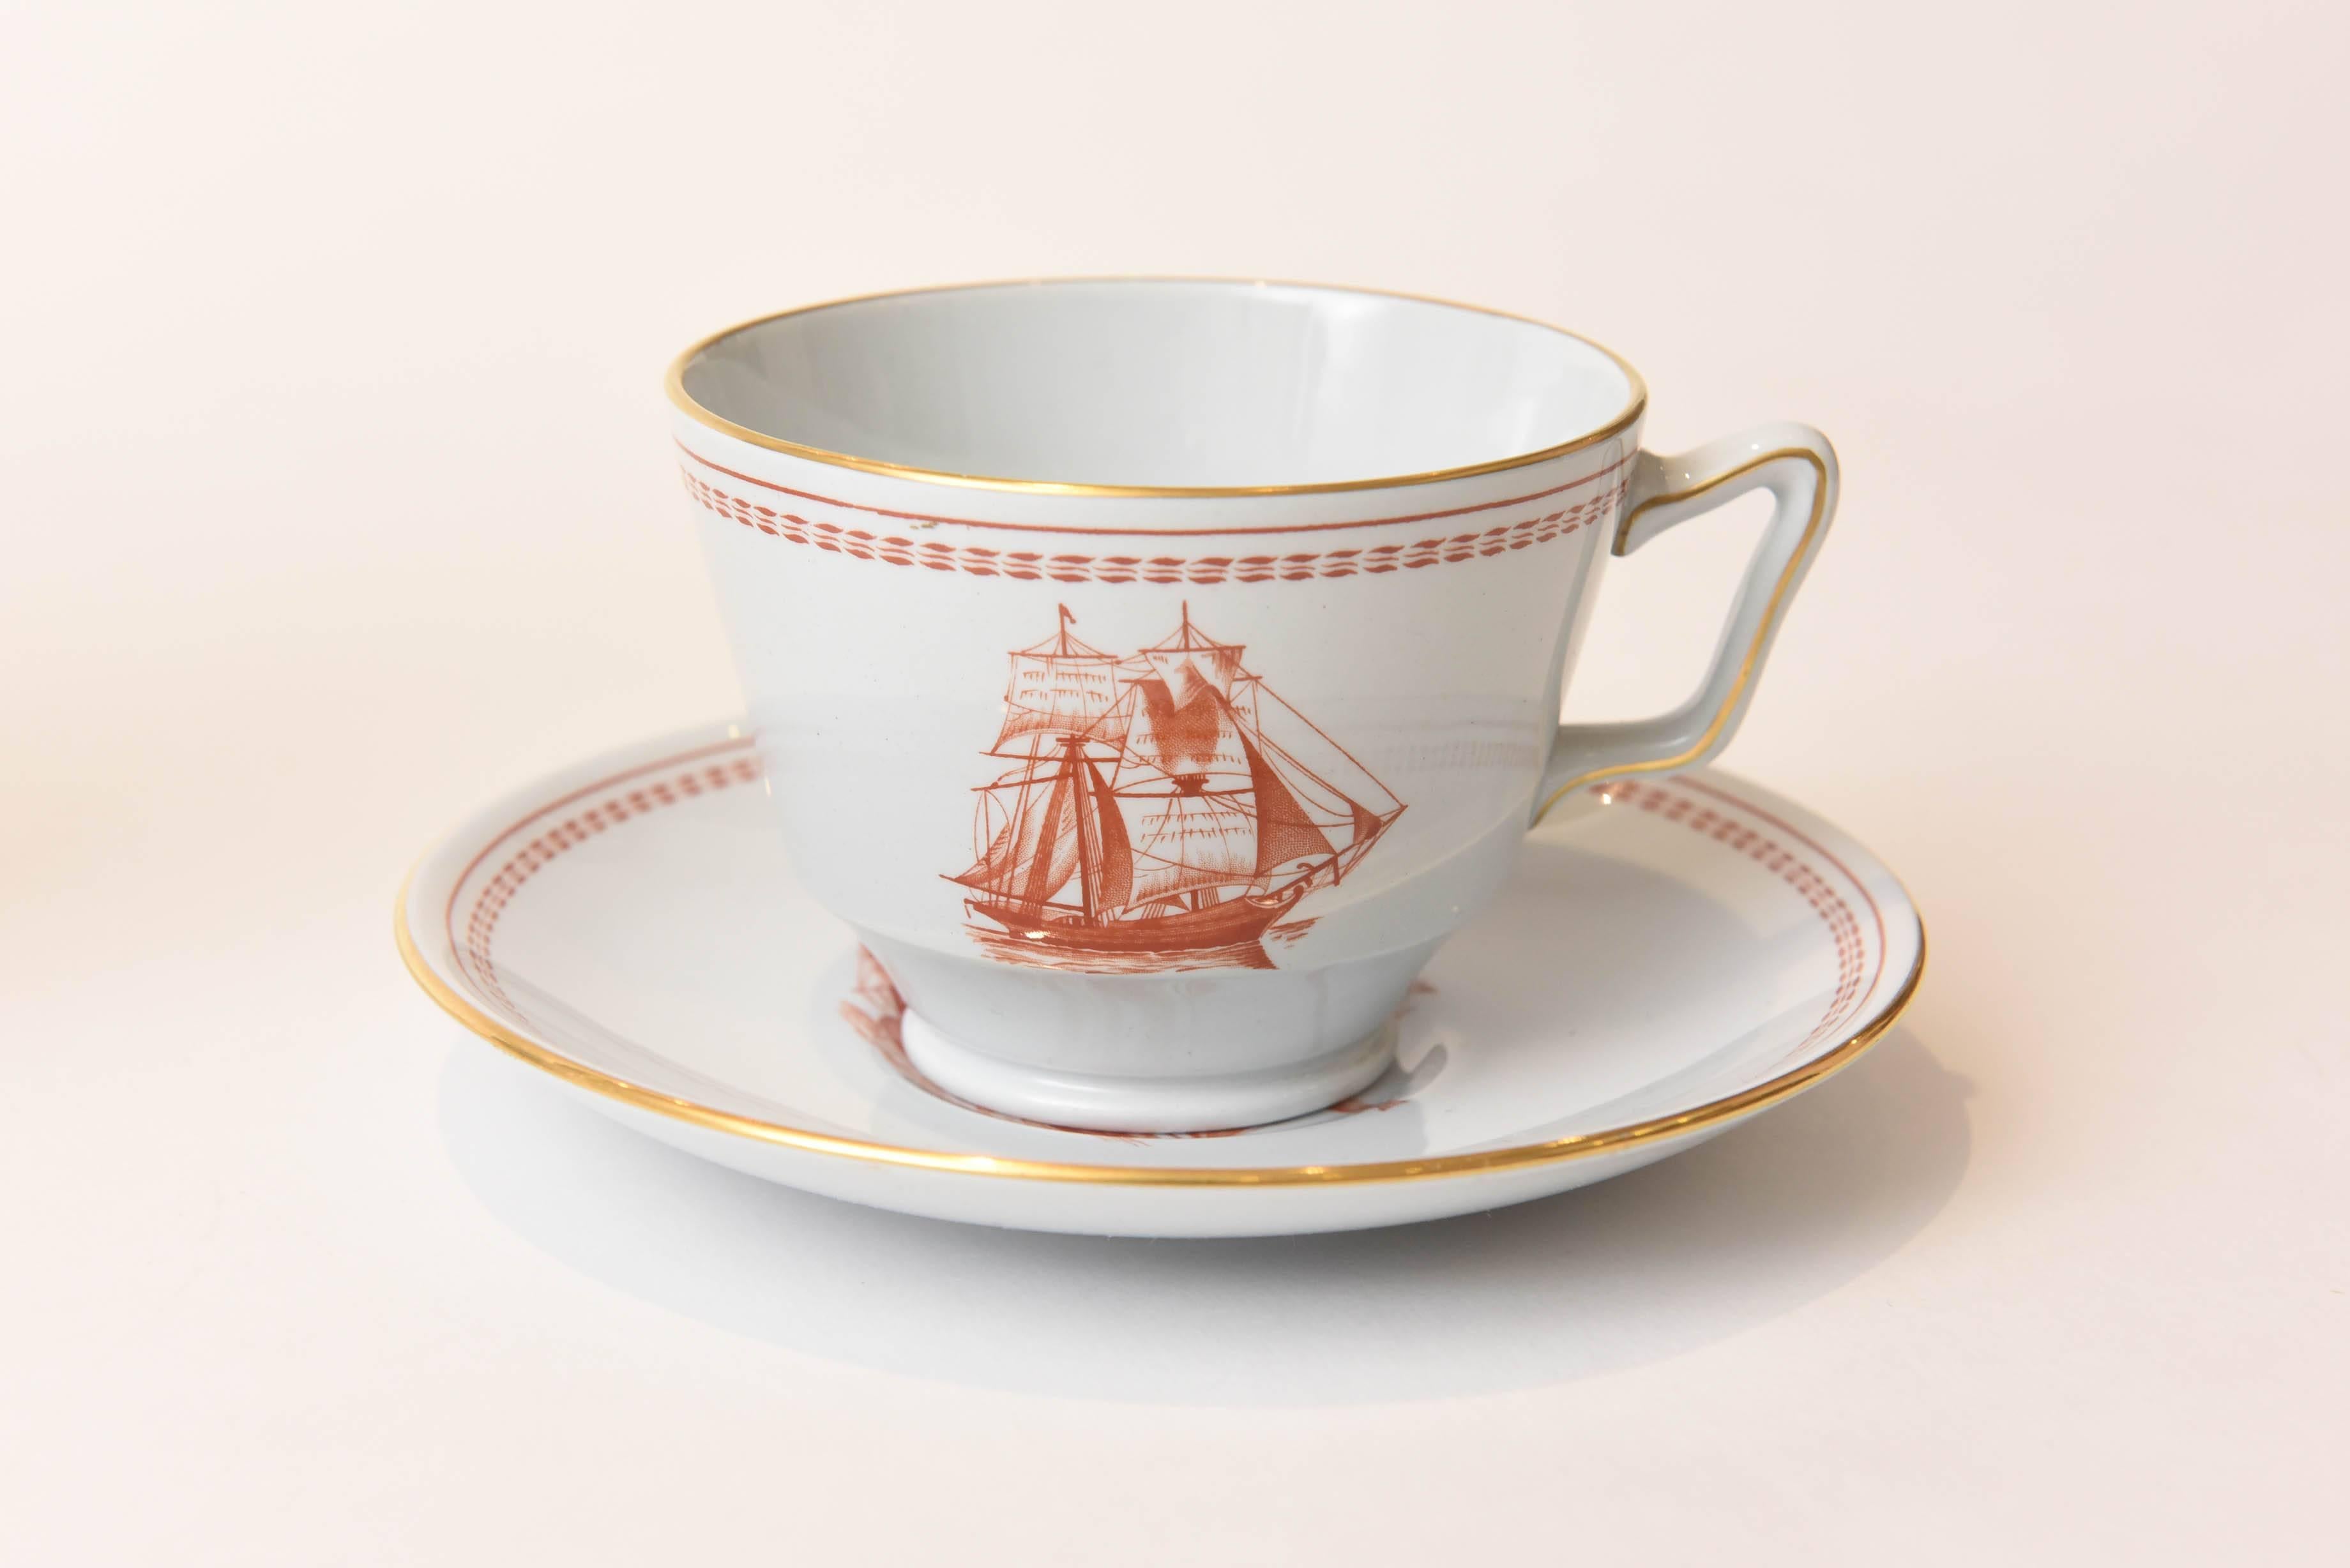 One of Spode's most collectible and successful Chinese export style patterns in the Tradewinds Red featuring various Sailing Ships or 